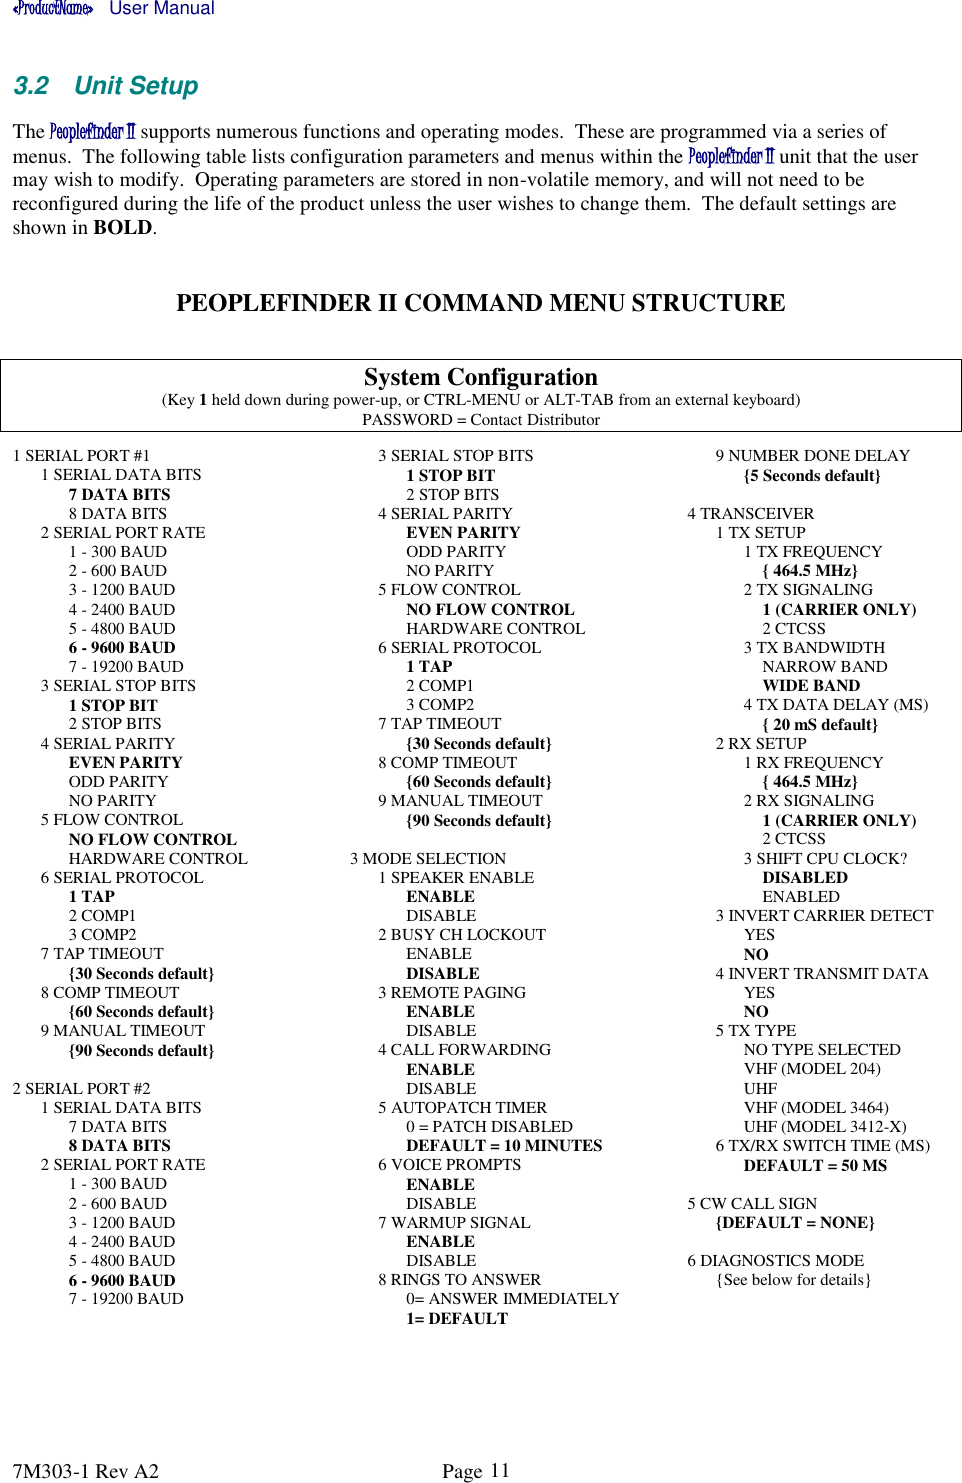 «ProductName»    User Manual 7M303-1 Rev A2  Page  11 3.2  Unit Setup The Peoplefinder II supports numerous functions and operating modes.  These are programmed via a series of menus.  The following table lists configuration parameters and menus within the Peoplefinder II unit that the user may wish to modify.  Operating parameters are stored in non-volatile memory, and will not need to be reconfigured during the life of the product unless the user wishes to change them.  The default settings are shown in BOLD.  PEOPLEFINDER II COMMAND MENU STRUCTURE  System Configuration (Key 1 held down during power-up, or CTRL-MENU or ALT-TAB from an external keyboard) PASSWORD = Contact Distributor  1 SERIAL PORT #1      1 SERIAL DATA BITS     7 DATA BITS        8 DATA BITS       2 SERIAL PORT RATE           1 - 300 BAUD           2 - 600 BAUD           3 - 1200 BAUD           4 - 2400 BAUD           5 - 4800 BAUD           6 - 9600 BAUD                 7 - 19200 BAUD   3 SERIAL STOP BITS     1 STOP BIT              2 STOP BITS       4 SERIAL PARITY     EVEN PARITY              ODD PARITY              NO PARITY   5 FLOW CONTROL     NO FLOW CONTROL     HARDWARE CONTROL  6 SERIAL PROTOCOL           1 TAP           2 COMP1           3 COMP2   7 TAP TIMEOUT         {30 Seconds default}   8 COMP TIMEOUT     {60 Seconds default}   9 MANUAL TIMEOUT     {90 Seconds default}  2 SERIAL PORT #2      1 SERIAL DATA BITS     7 DATA BITS        8 DATA BITS 2 SERIAL PORT RATE           1 - 300 BAUD           2 - 600 BAUD           3 - 1200 BAUD           4 - 2400 BAUD           5 - 4800 BAUD           6 - 9600 BAUD                 7 - 19200 BAUD       3 SERIAL STOP BITS     1 STOP BIT              2 STOP BITS       4 SERIAL PARITY     EVEN PARITY              ODD PARITY              NO PARITY   5 FLOW CONTROL     NO FLOW CONTROL     HARDWARE CONTROL  6 SERIAL PROTOCOL           1 TAP           2 COMP1           3 COMP2   7 TAP TIMEOUT         {30 Seconds default}   8 COMP TIMEOUT     {60 Seconds default}   9 MANUAL TIMEOUT     {90 Seconds default}  3 MODE SELECTION   1 SPEAKER ENABLE     ENABLE     DISABLE     2 BUSY CH LOCKOUT     ENABLE     DISABLE     3 REMOTE PAGING     ENABLE     DISABLE     4 CALL FORWARDING     ENABLE     DISABLE     5 AUTOPATCH TIMER     0 = PATCH DISABLED     DEFAULT = 10 MINUTES     6 VOICE PROMPTS     ENABLE     DISABLE     7 WARMUP SIGNAL     ENABLE     DISABLE    8 RINGS TO ANSWER     0= ANSWER IMMEDIATELY     1= DEFAULT     9 NUMBER DONE DELAY     {5 Seconds default}  4 TRANSCEIVER   1 TX SETUP           1 TX FREQUENCY       { 464.5 MHz}     2 TX SIGNALING                1 (CARRIER ONLY)                2 CTCSS           3 TX BANDWIDTH       NARROW BAND                   WIDE BAND     4 TX DATA DELAY (MS)       { 20 mS default} 2 RX SETUP    1 RX FREQUENCY     { 464.5 MHz}   2 RX SIGNALING     1 (CARRIER ONLY)     2 CTCSS   3 SHIFT CPU CLOCK?     DISABLED     ENABLED 3 INVERT CARRIER DETECT     YES     NO   4 INVERT TRANSMIT DATA     YES     NO   5 TX TYPE     NO TYPE SELECTED      VHF (MODEL 204)     UHF     VHF (MODEL 3464)     UHF (MODEL 3412-X)  6 TX/RX SWITCH TIME (MS)     DEFAULT = 50 MS  5 CW CALL SIGN   {DEFAULT = NONE}    6 DIAGNOSTICS MODE   {See below for details}   